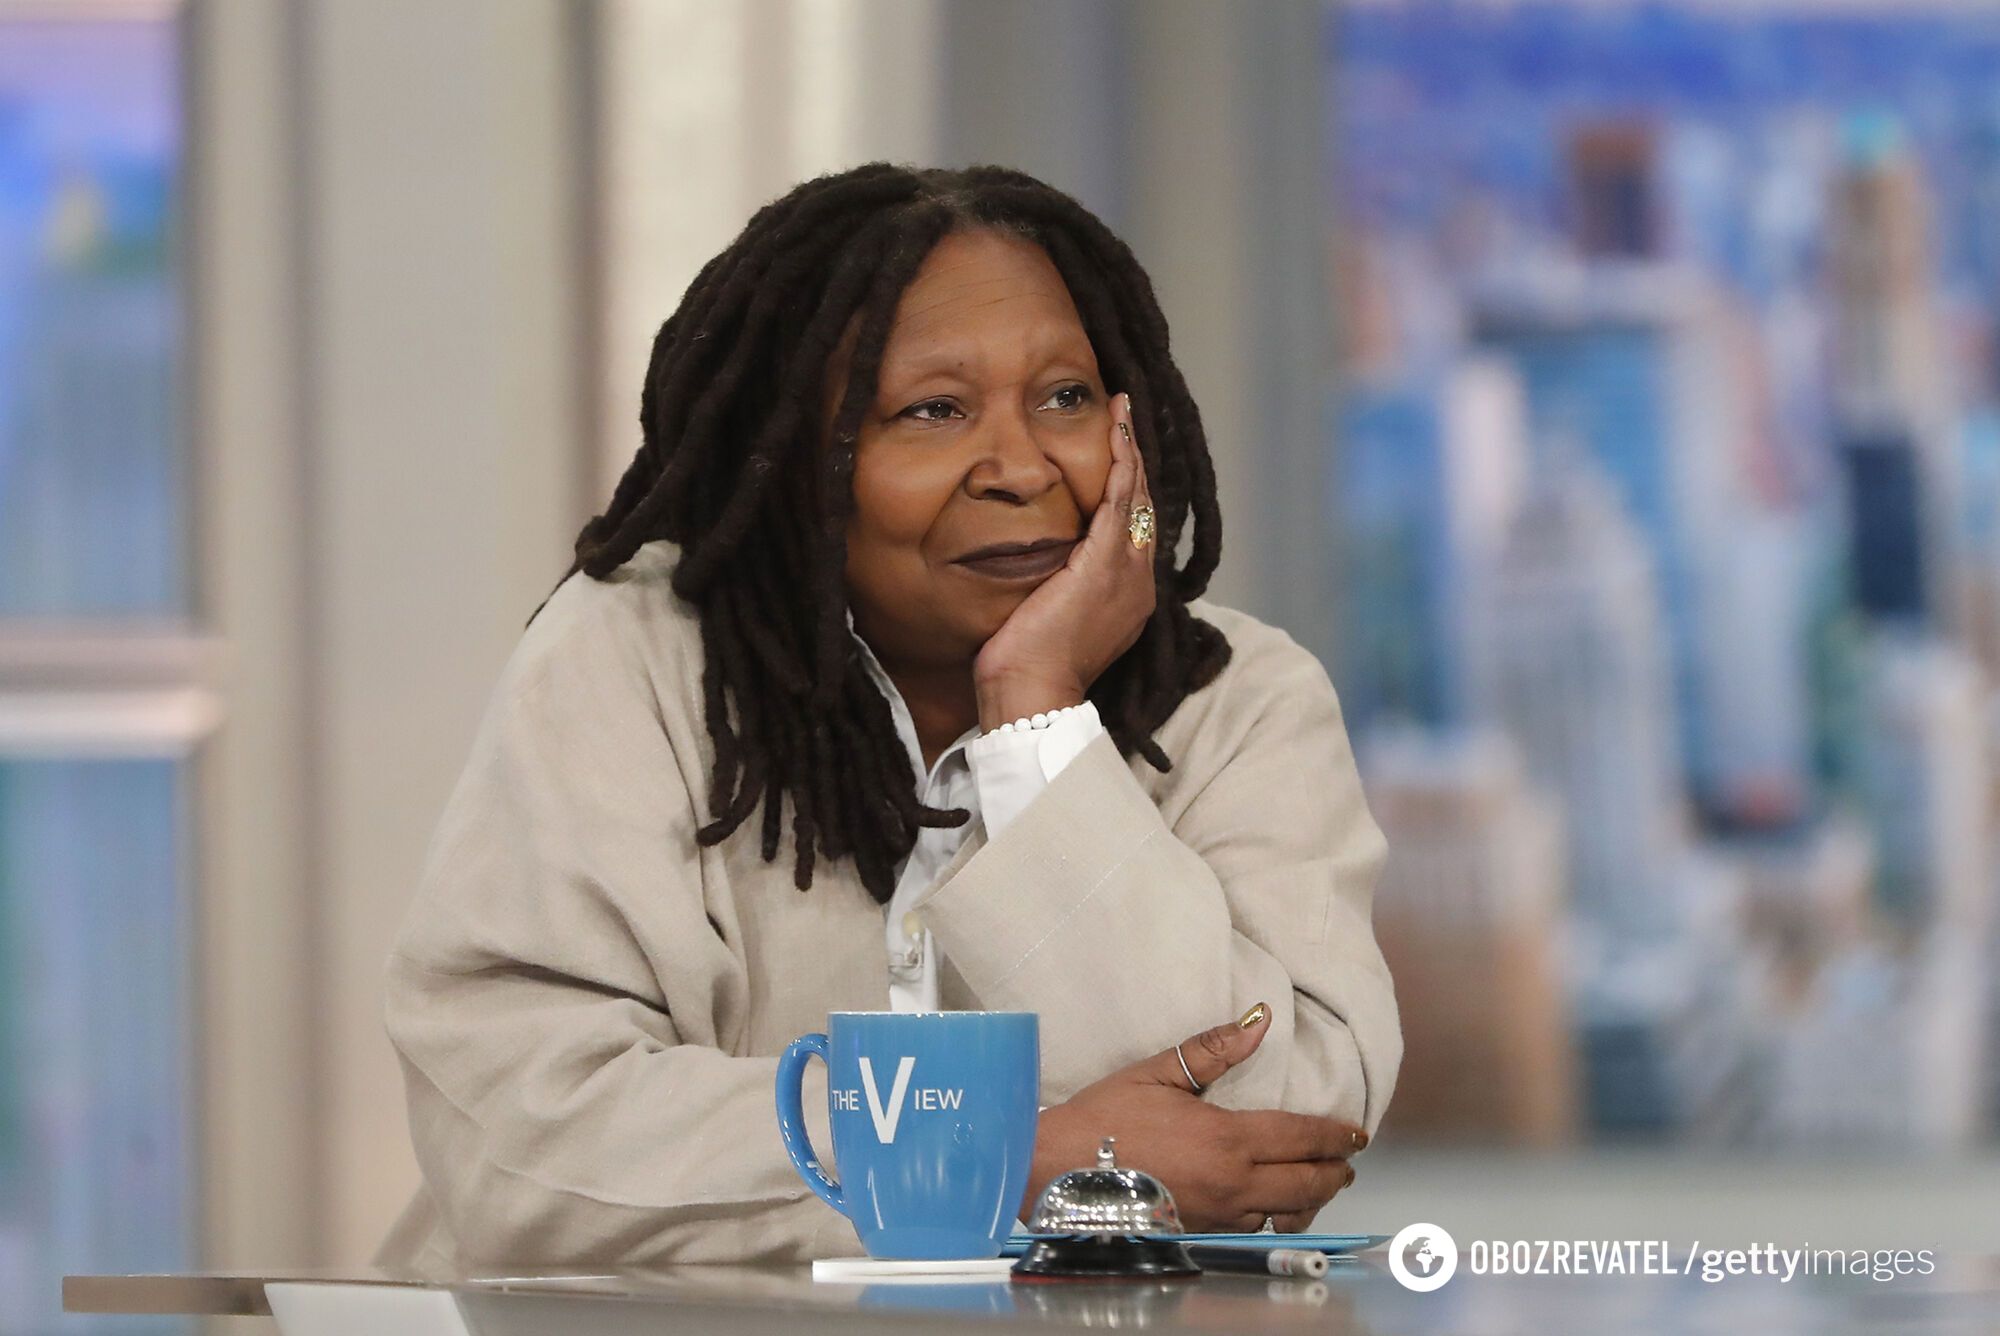 Whoopi Goldberg on Trump's recent speeches: it's not him, it's artificial intelligence